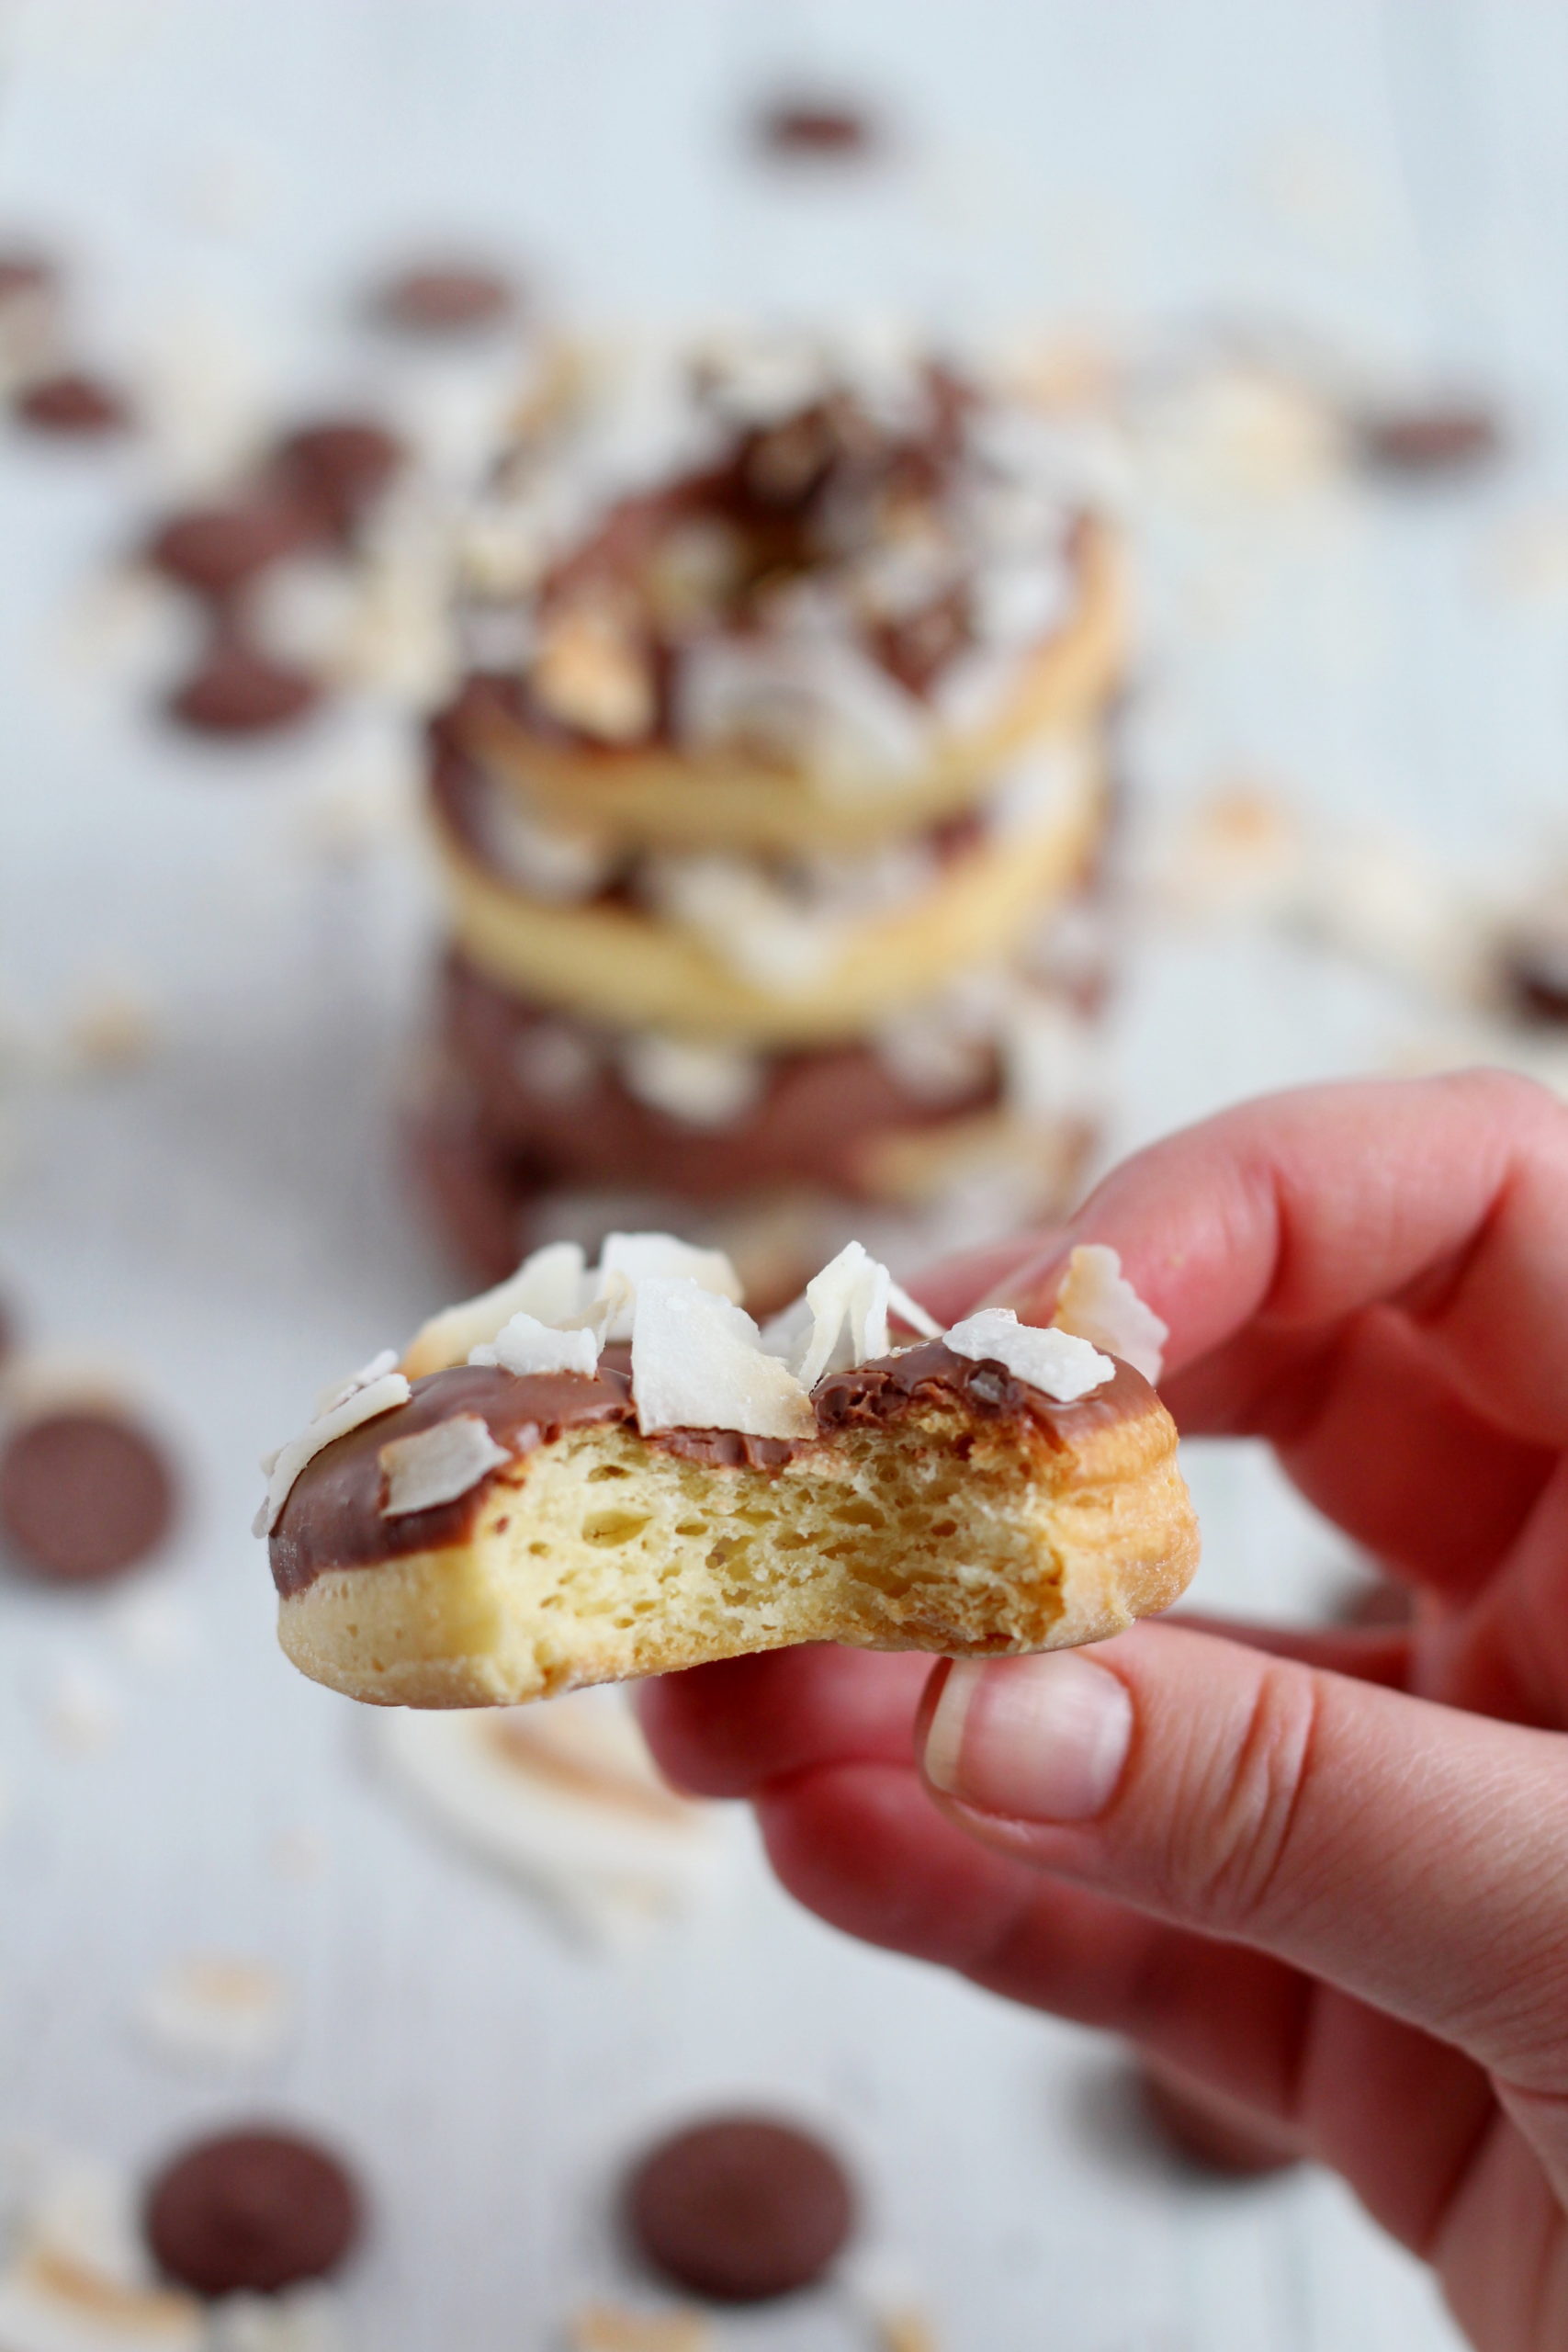 baked style donuts with chocolate glaze